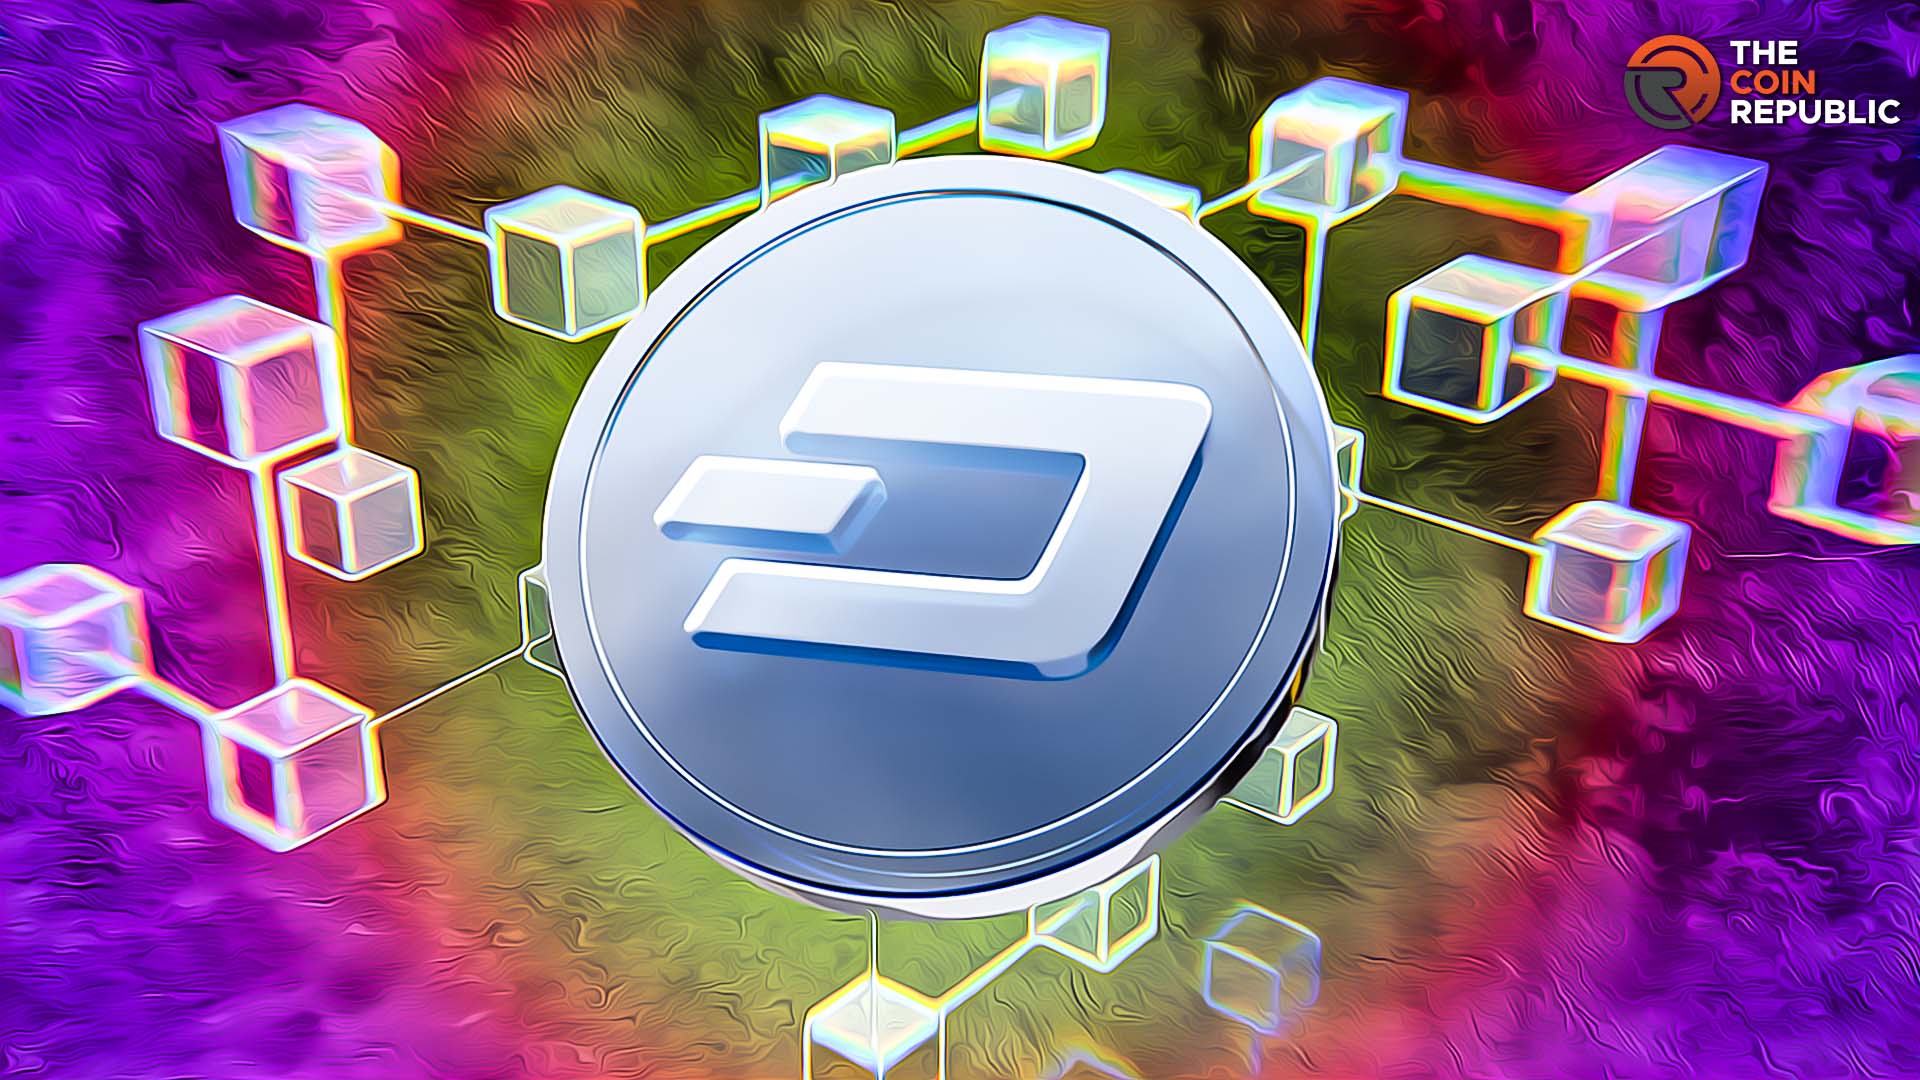 Dash Blockchain resumed block production after hours of downtime